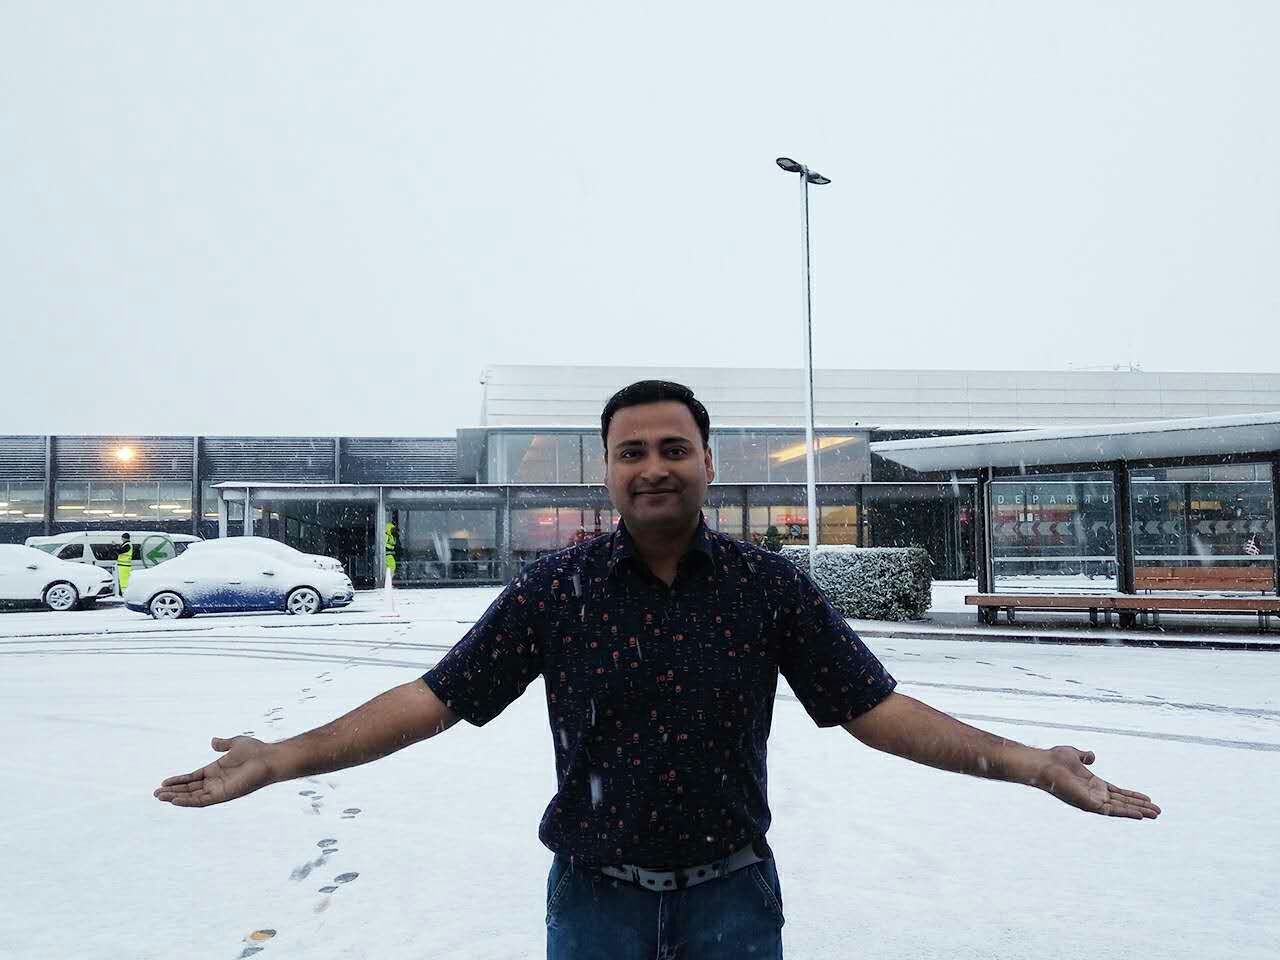 What happens if you miss your flight? Well, I was able to see the first day of snowfall in Queenstown New Zealand!